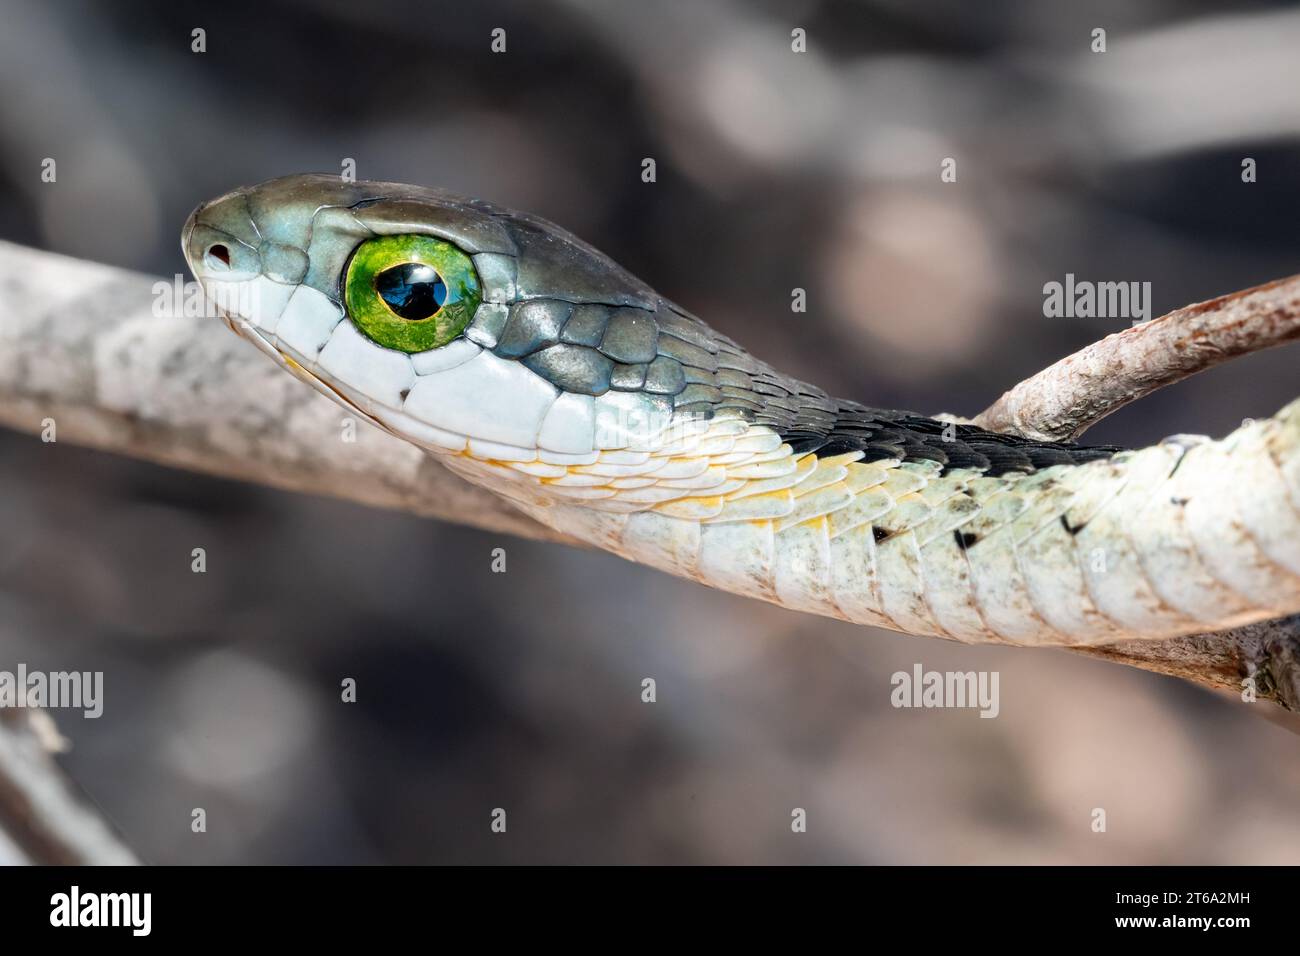 A snake coiled around a branch with its bright green eyes staring into the camera Stock Photo